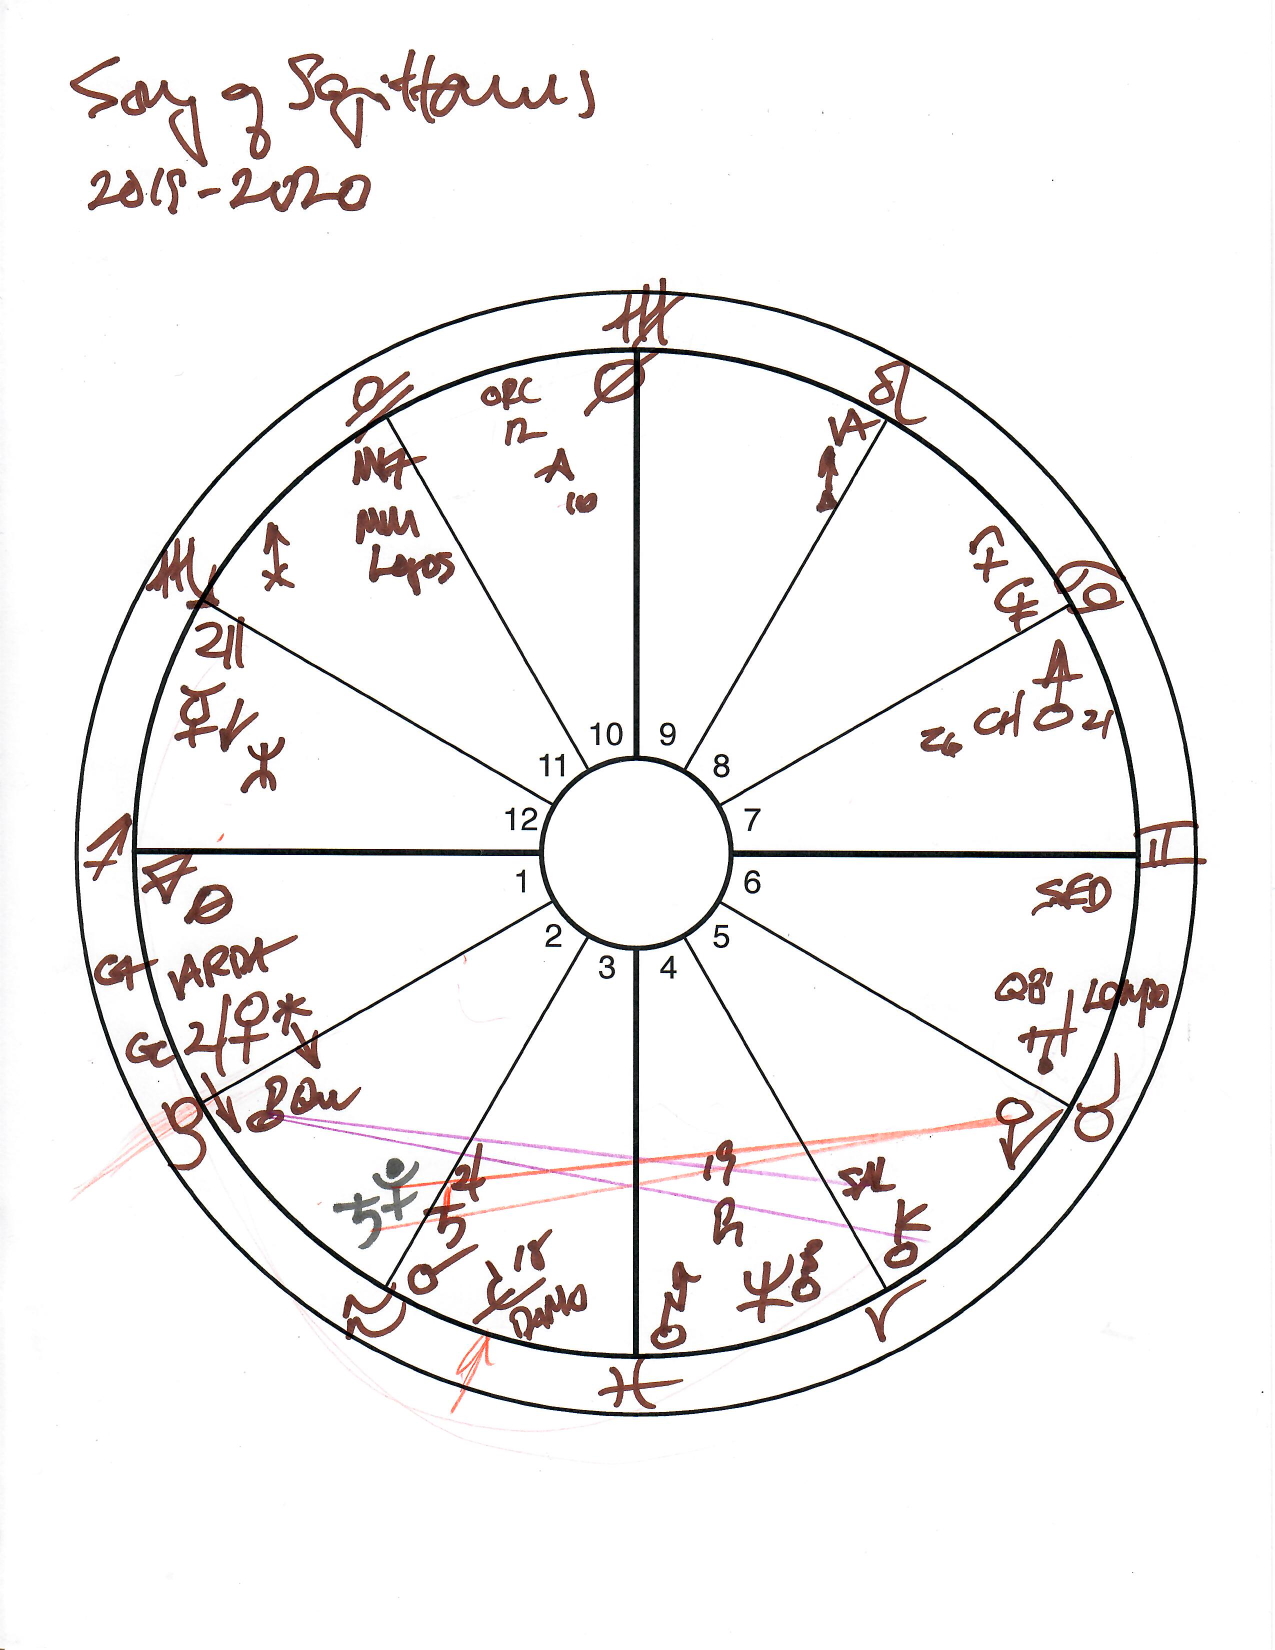 Chart for Sagittarius. Click image for full-size version.